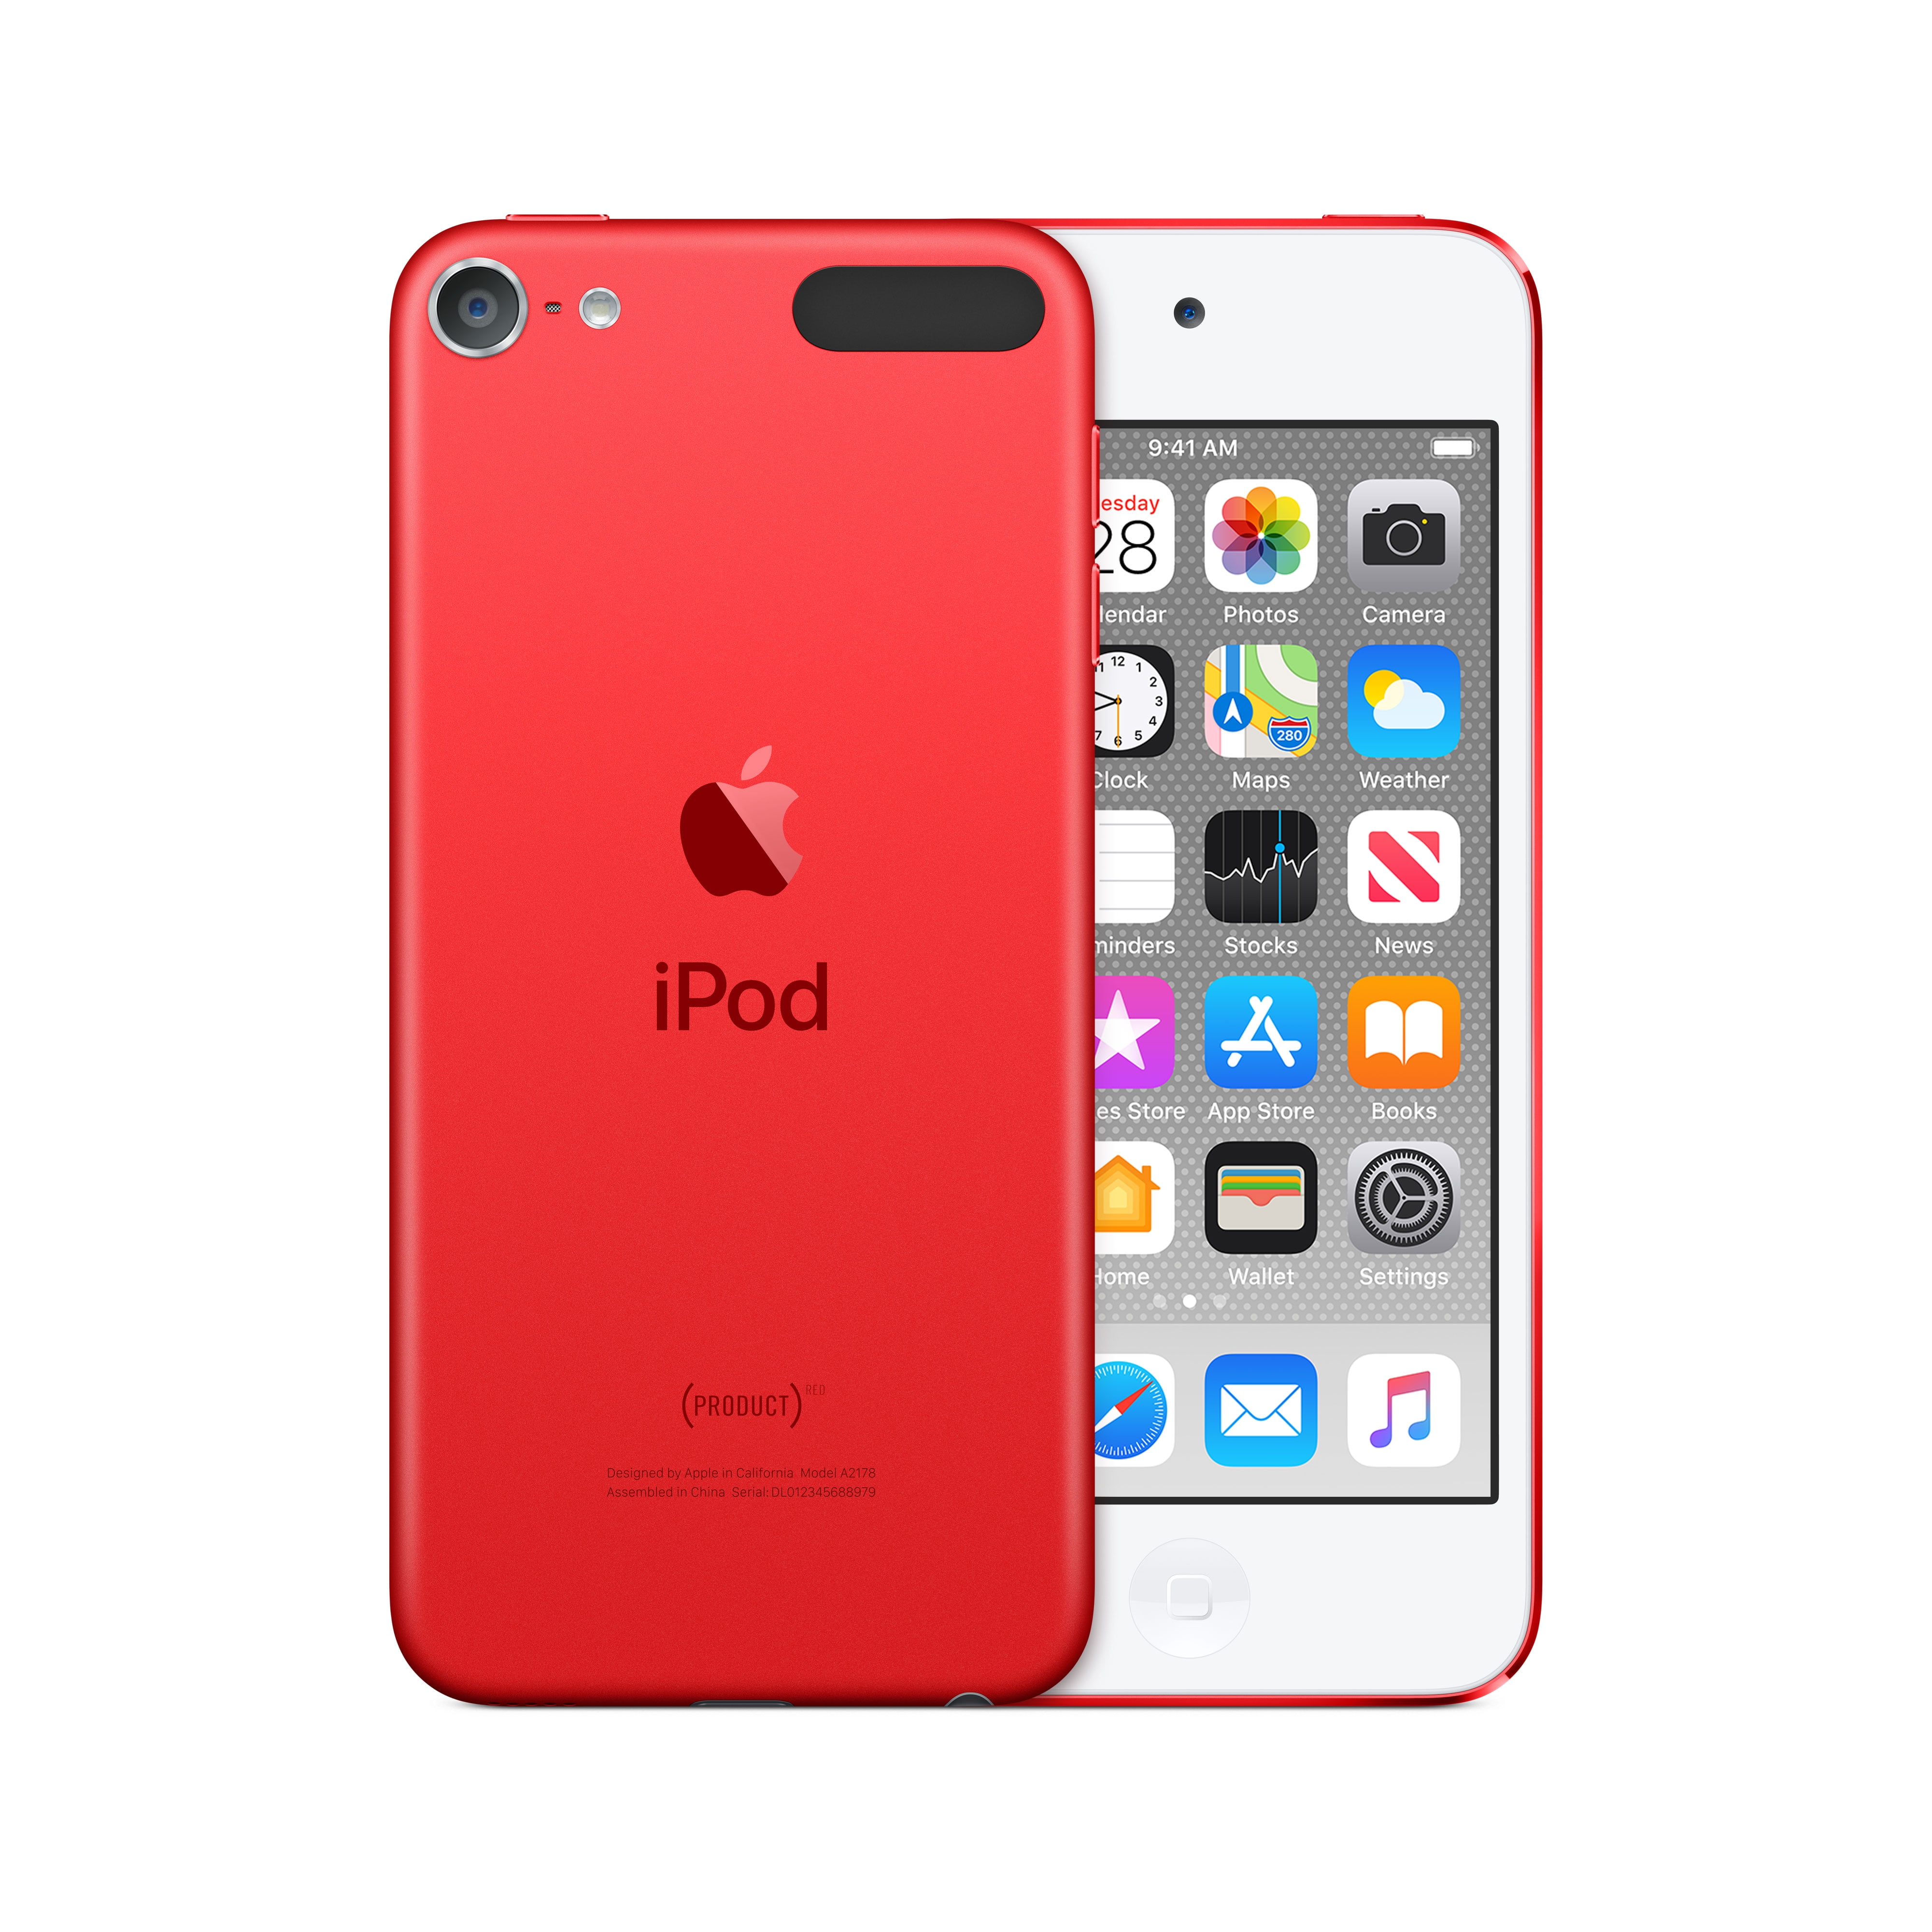 Apple iPod touch 7th Generation 32GB - PRODUCT(RED) (New Model